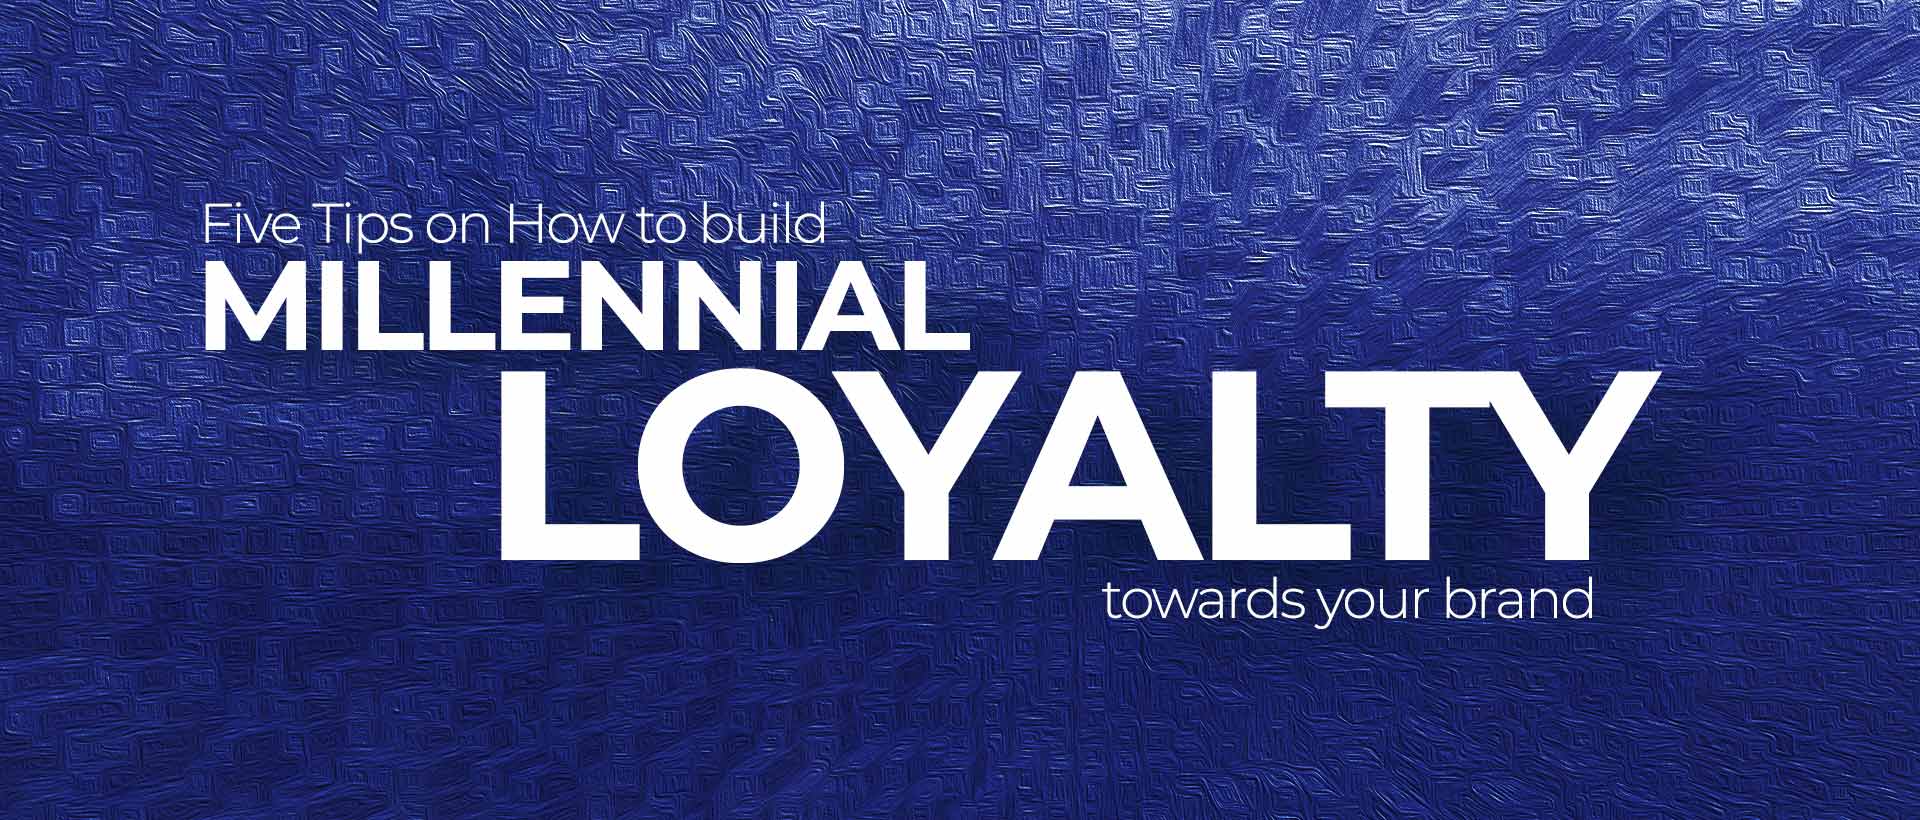 Five Tips on How to build millennial loyalty towards your brand